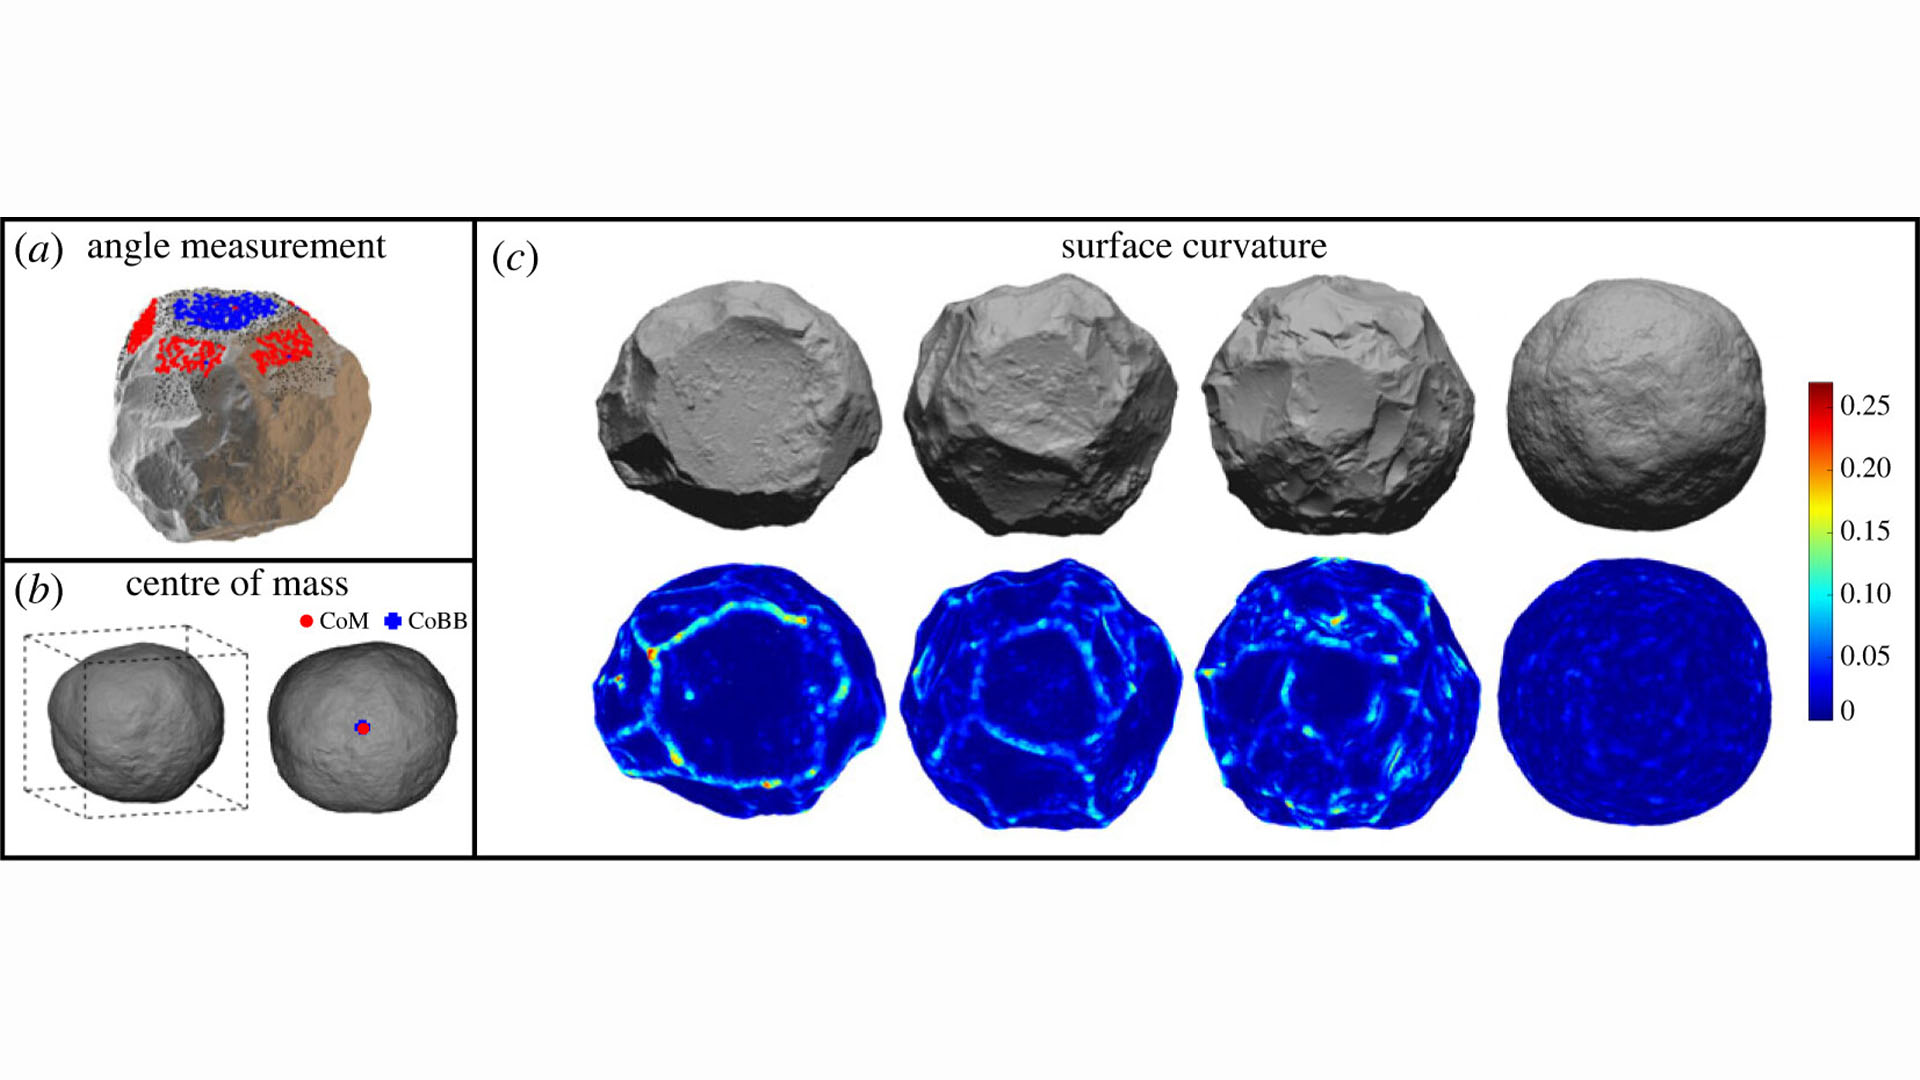 Analysis of spheroids that shows how hominins created the shapes over time.